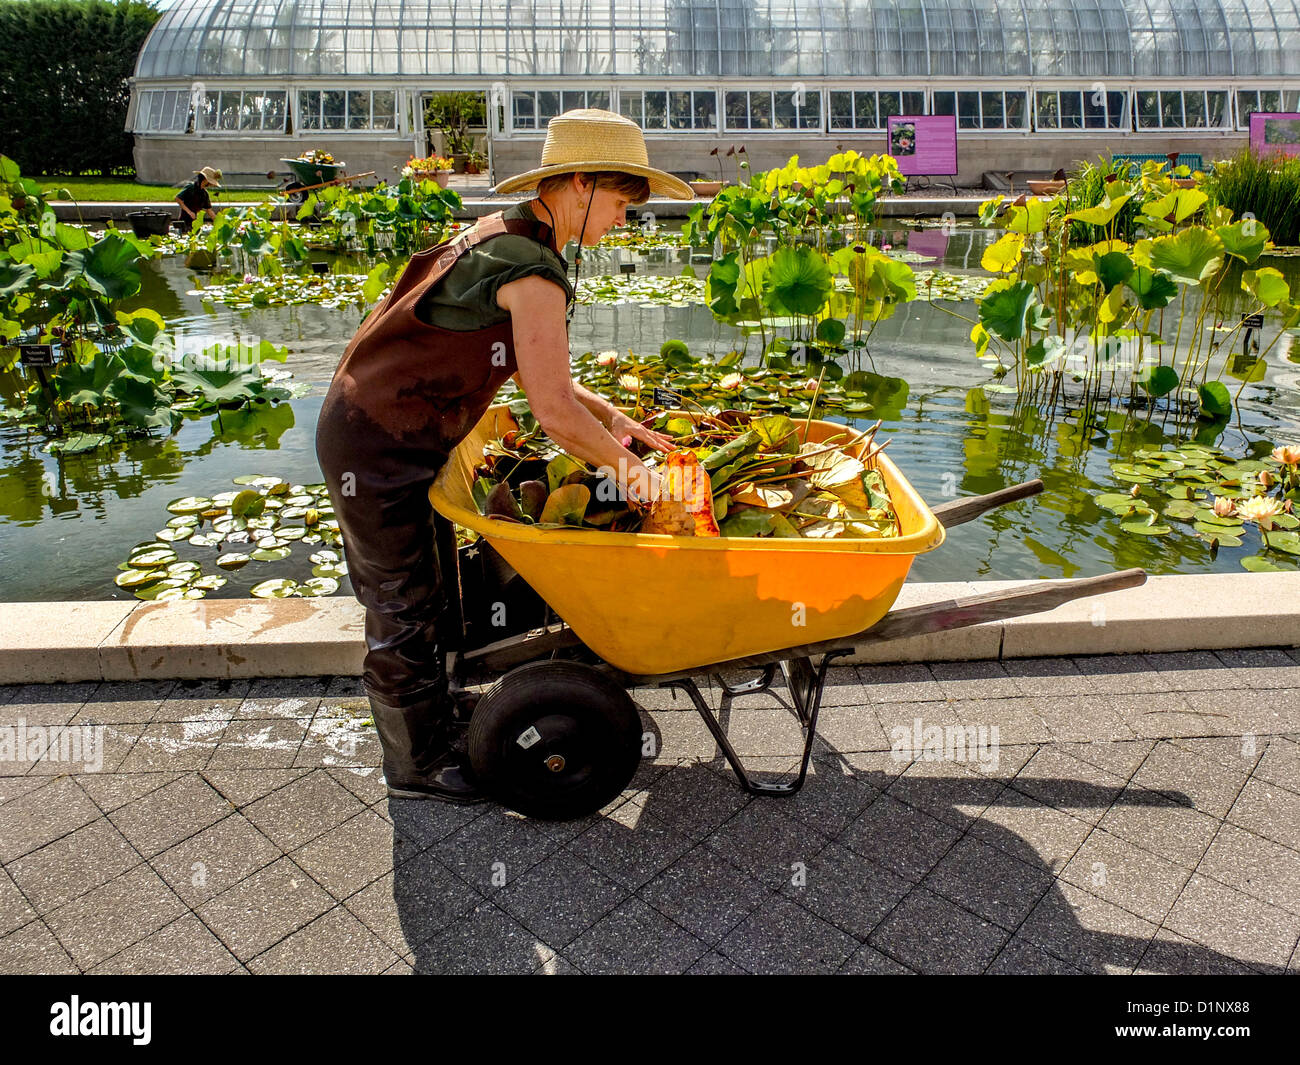 Wearing waterproof waders, a gardener tending water lilies at the Haupt Conservatory pond at the New York Botanical Gardens in Stock Photo